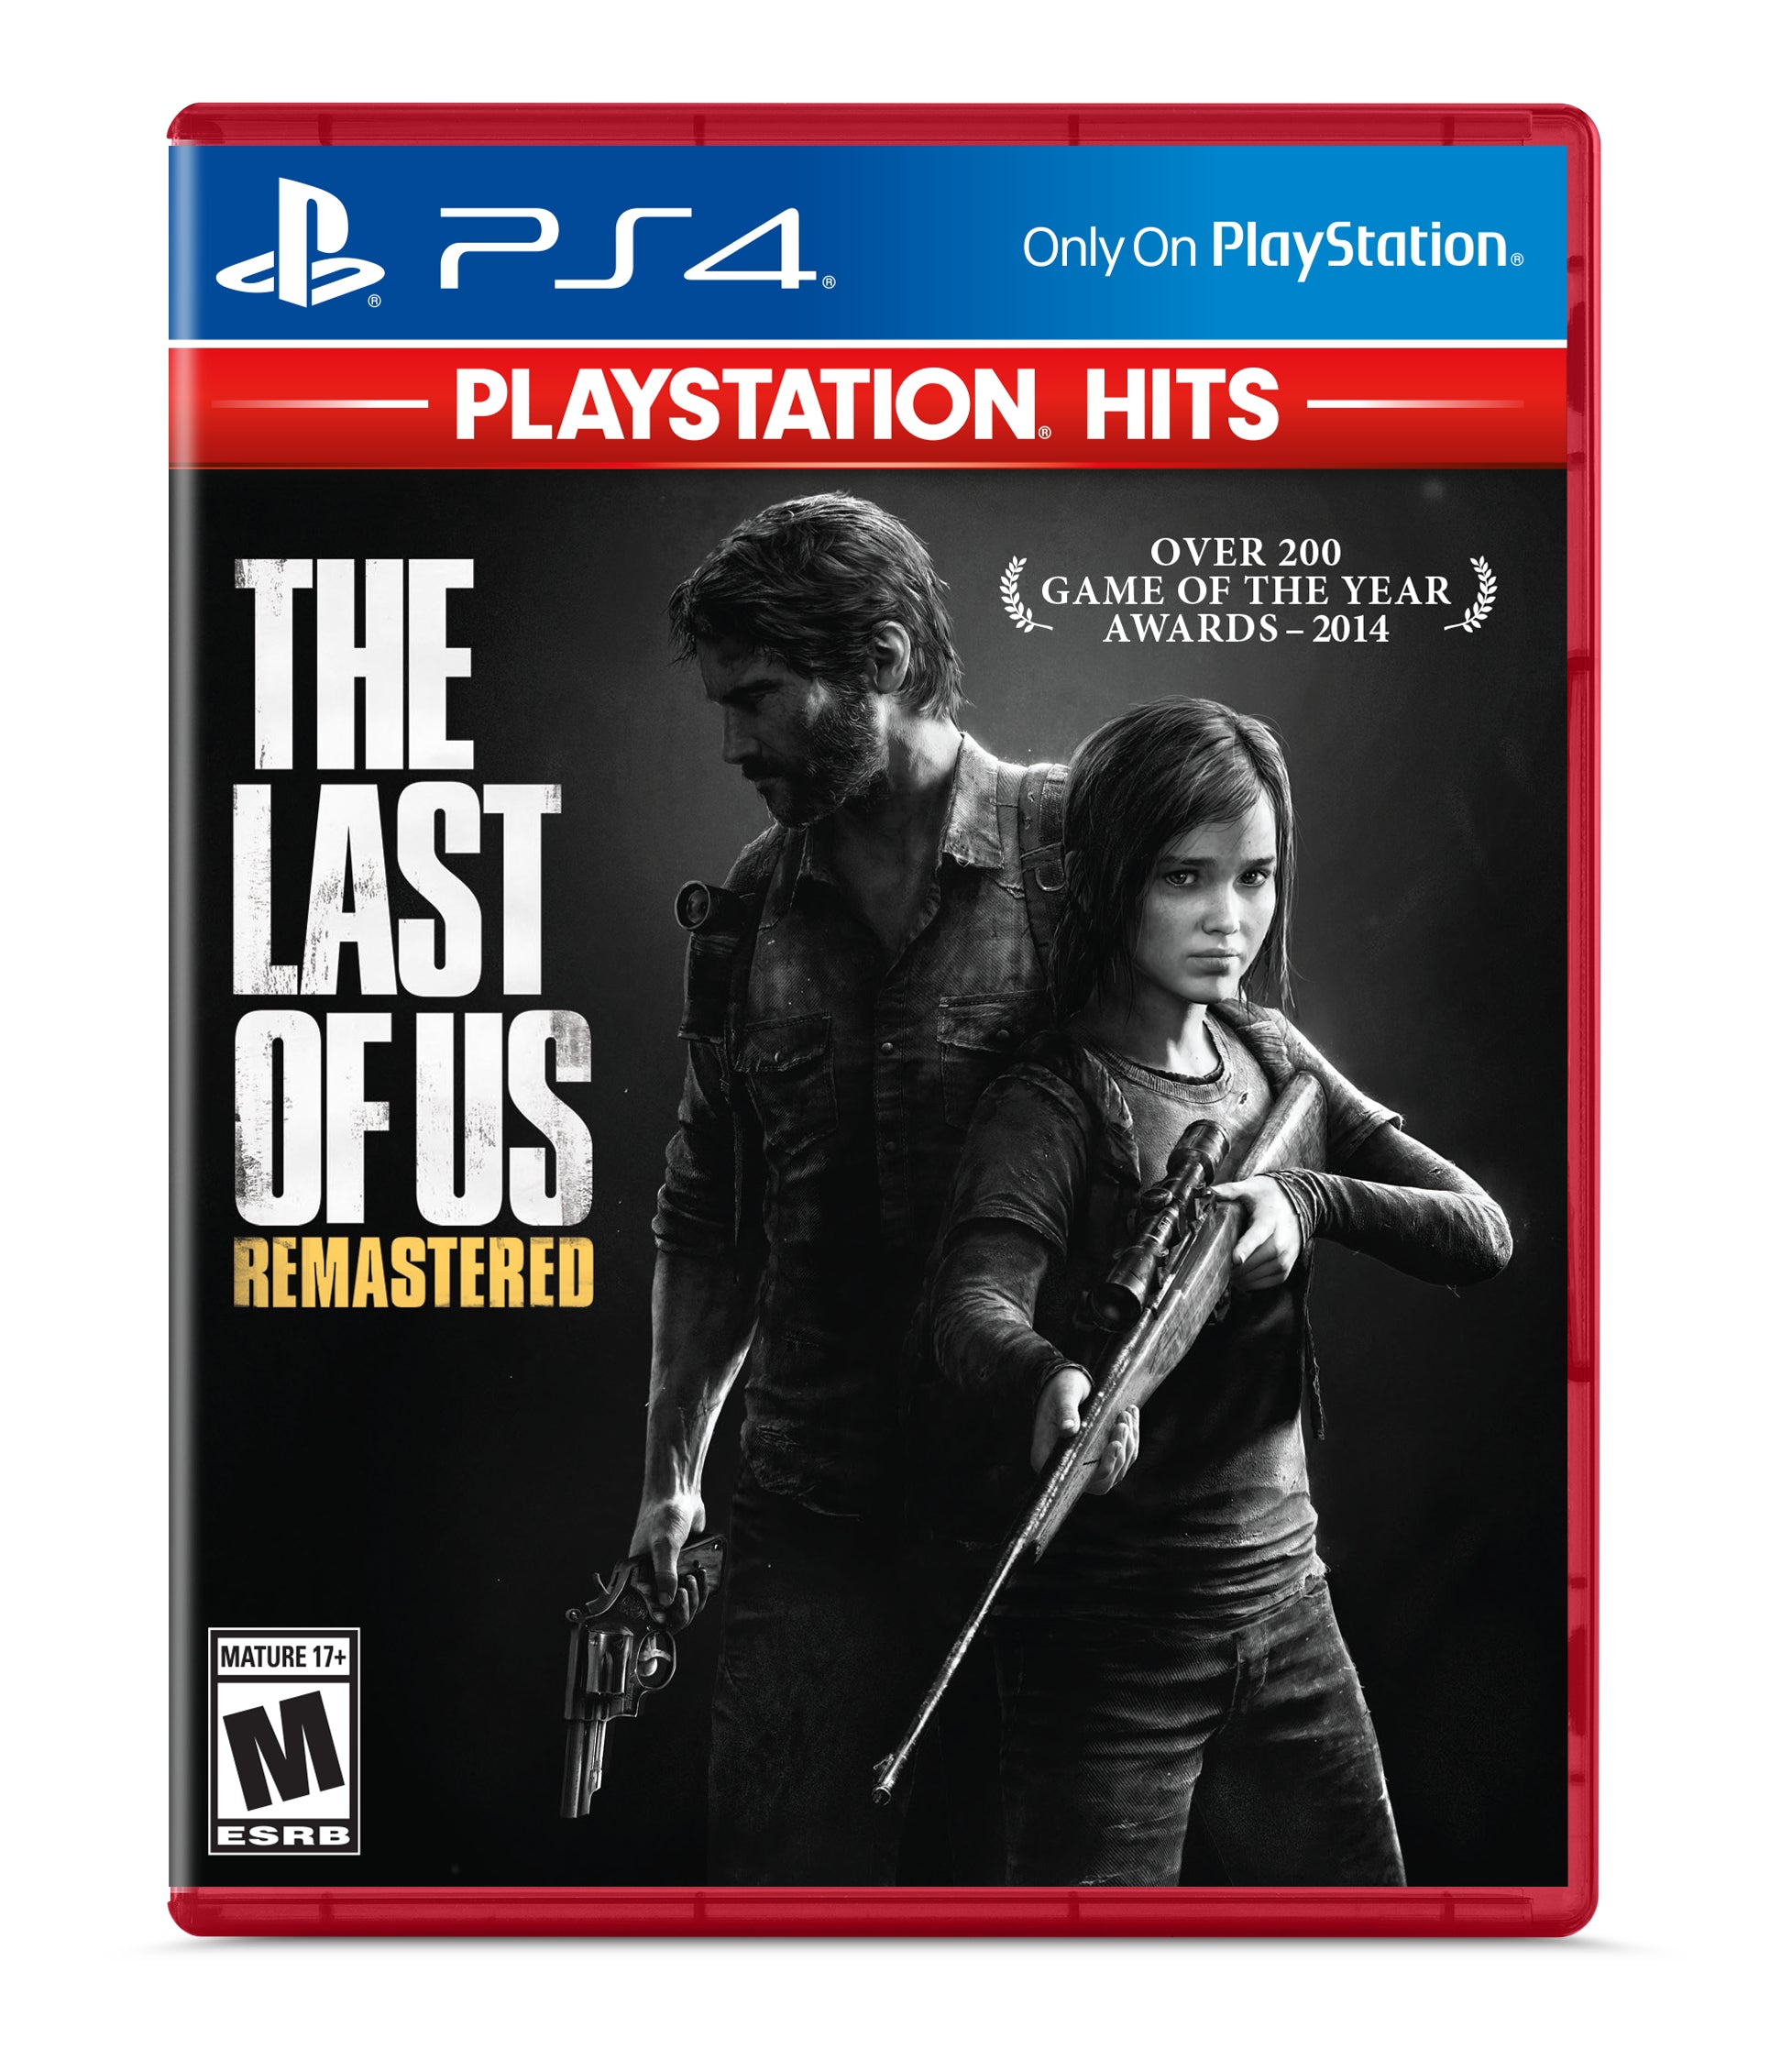 Sony PlayStation 4 Slim The Last of Us: Remastered Bundle Upgrade 1TB SSD PS4 Gaming Console, Jet Black, with Mytrix High Speed HDMI - Internal Fast Solid State Drive Enhanced PS4 Console